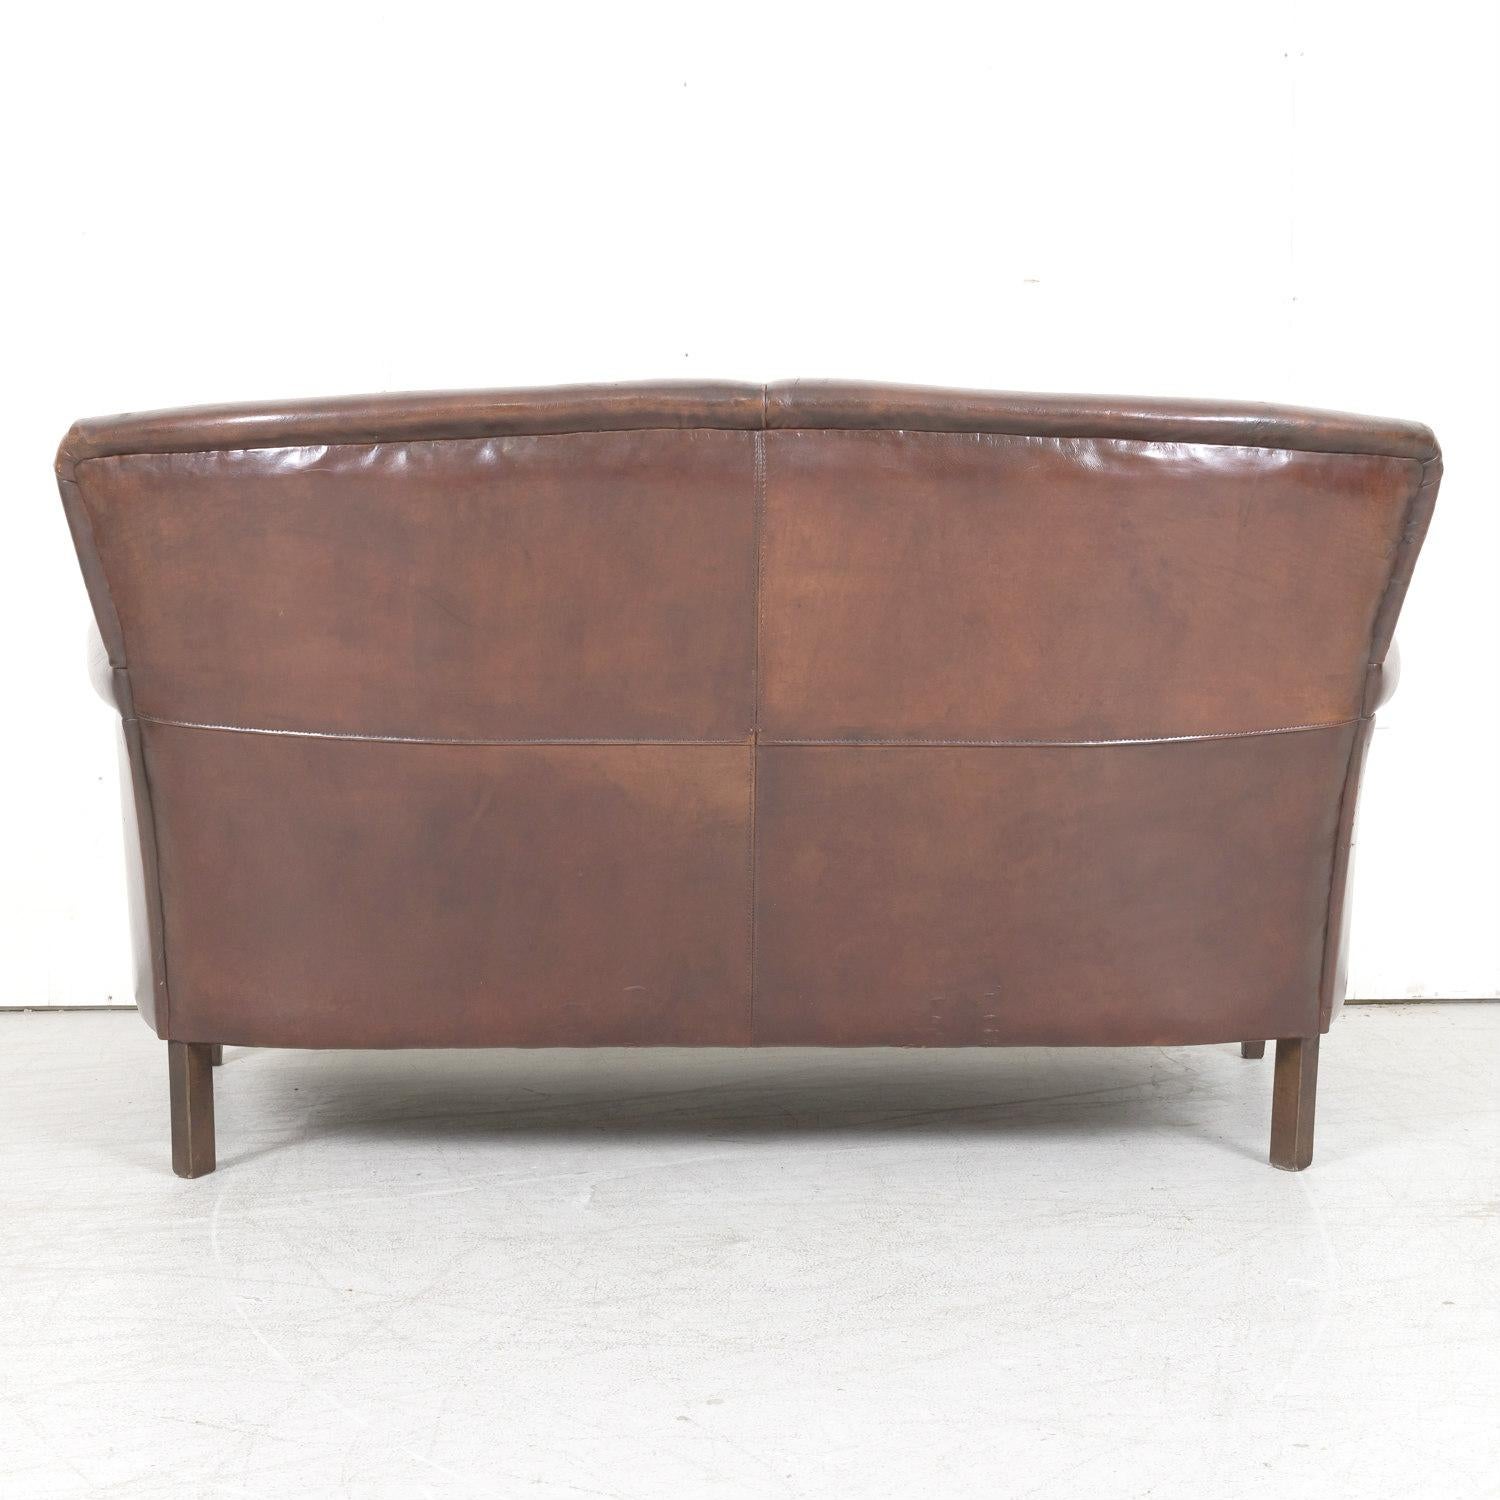 20th Century French Art Deco Settee or Sofa in Original Dark Brown Leather For Sale 12